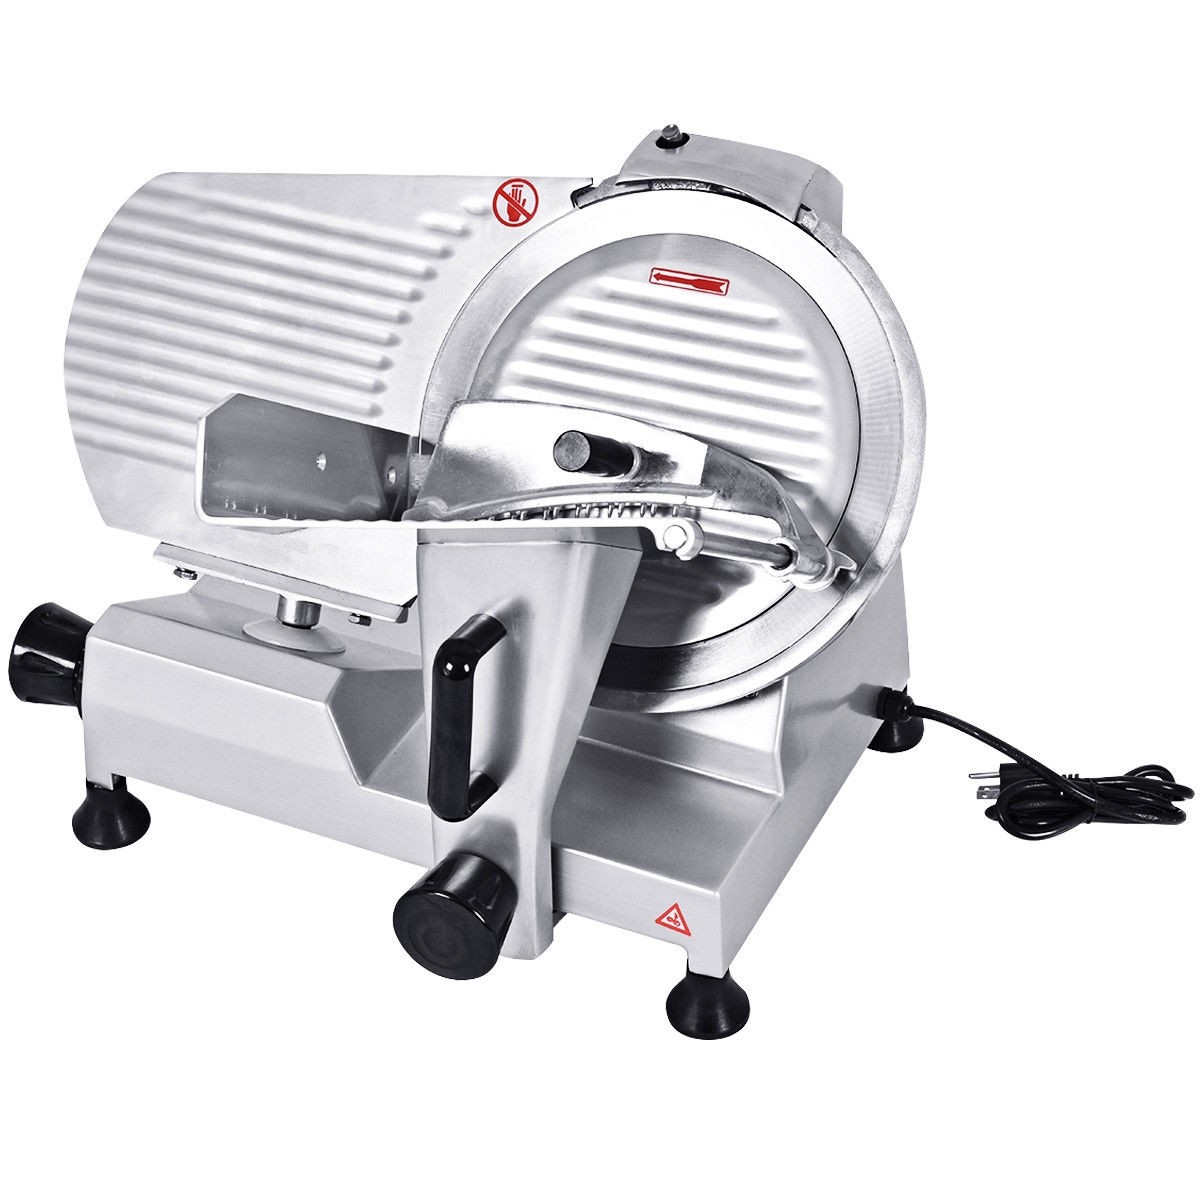 12 In. High-Efficiency Semi-Auto Commercial Meat Slicer